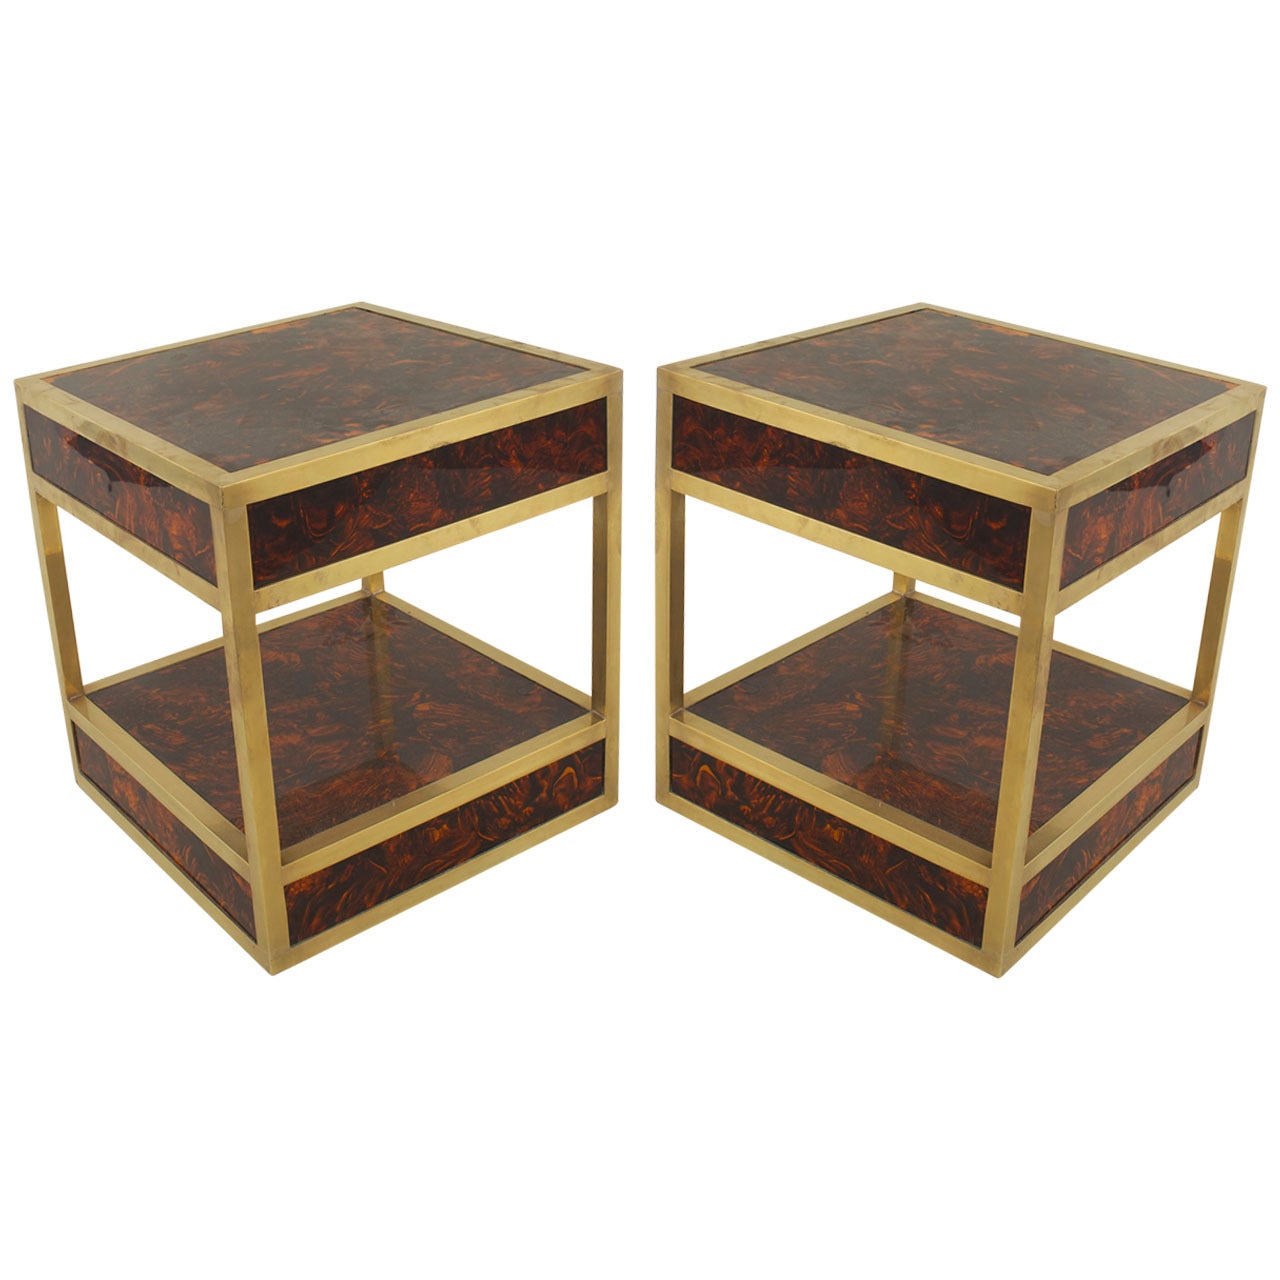 Pair of French Square Brass-Trimmed End Tables